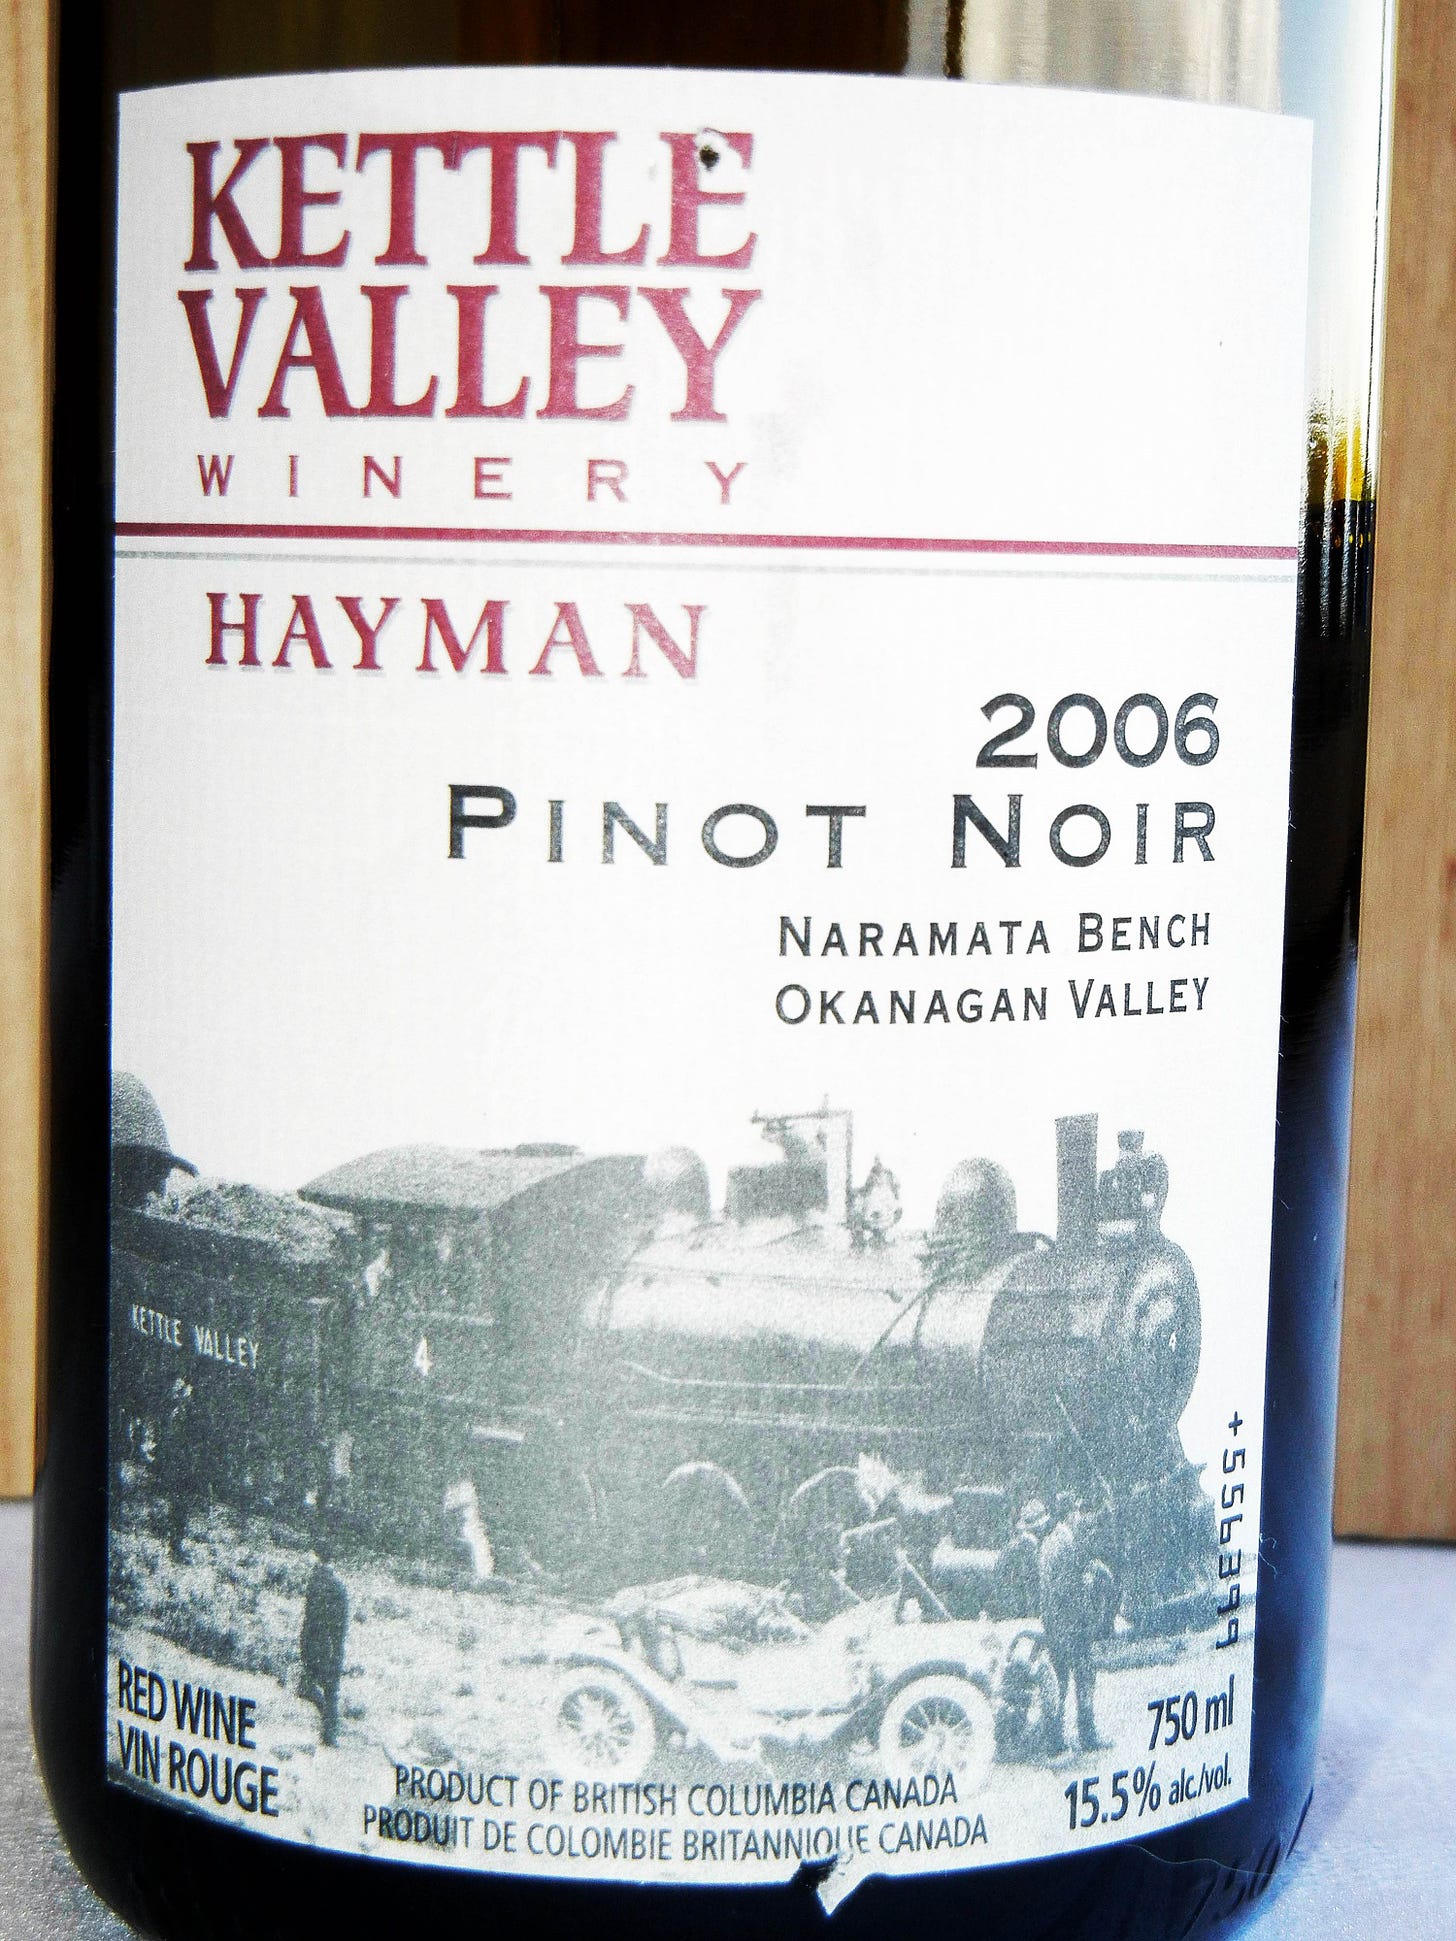 Kettle Valley Hayman Pinot Noir 2006 Label - BC Pinot Noir Tasting Review 12